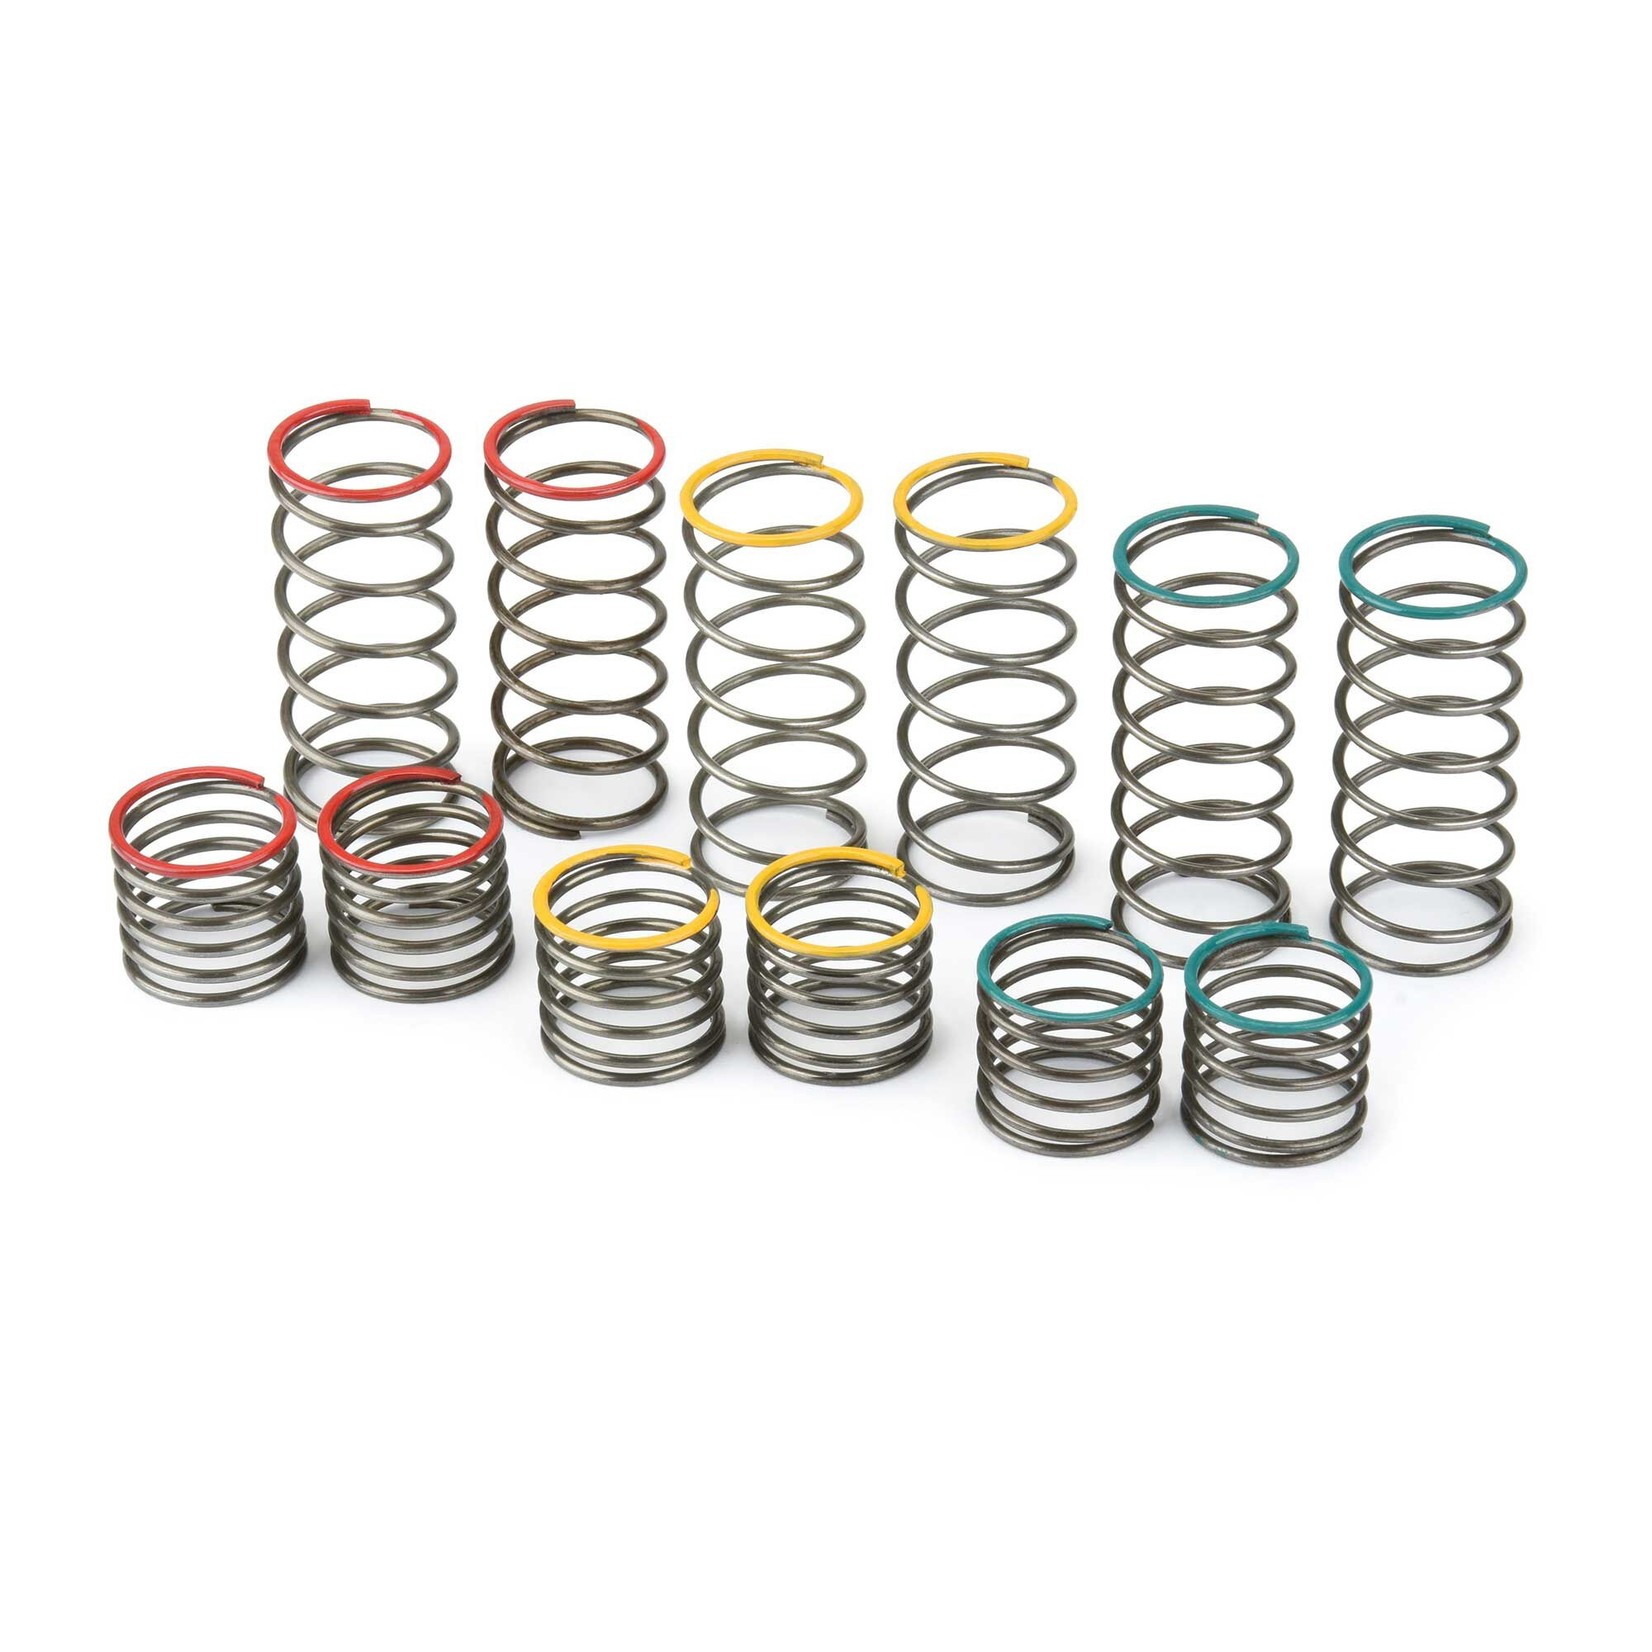 Pro-Line 1/10 Front Spring Assortment for PRO635900